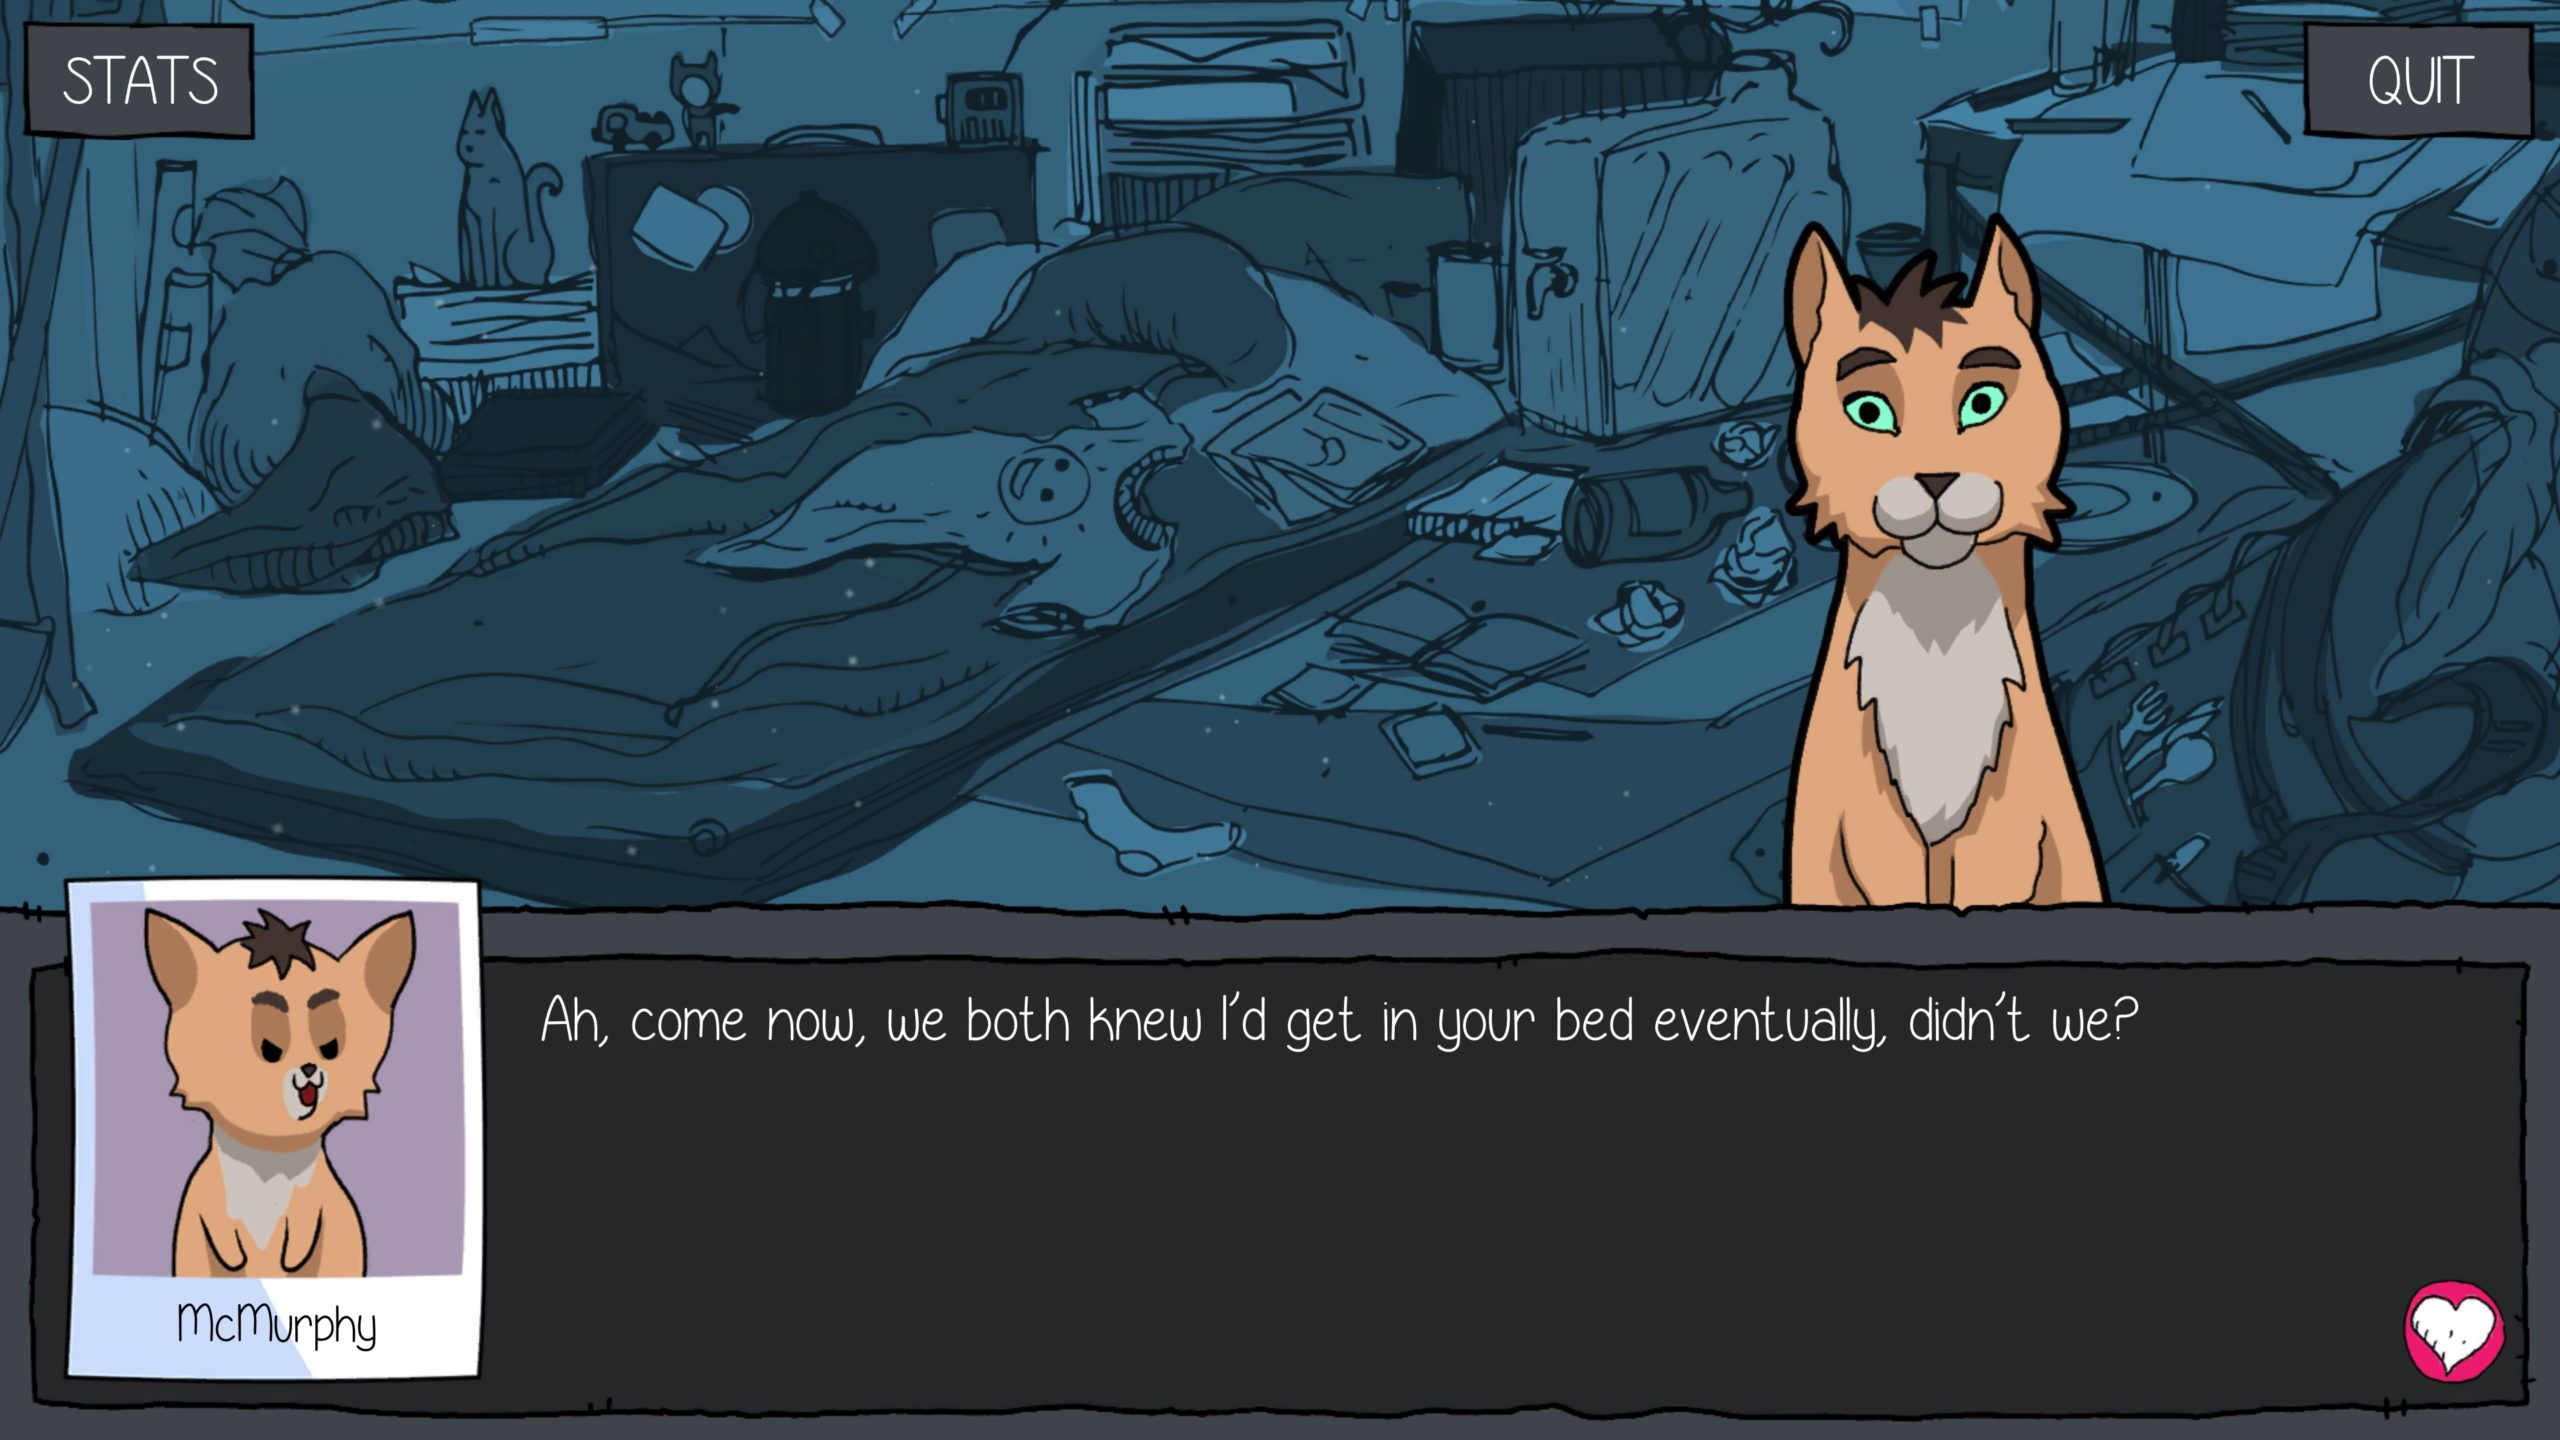 Cat Dating Sim Purrfect Date Is Not What I Expected